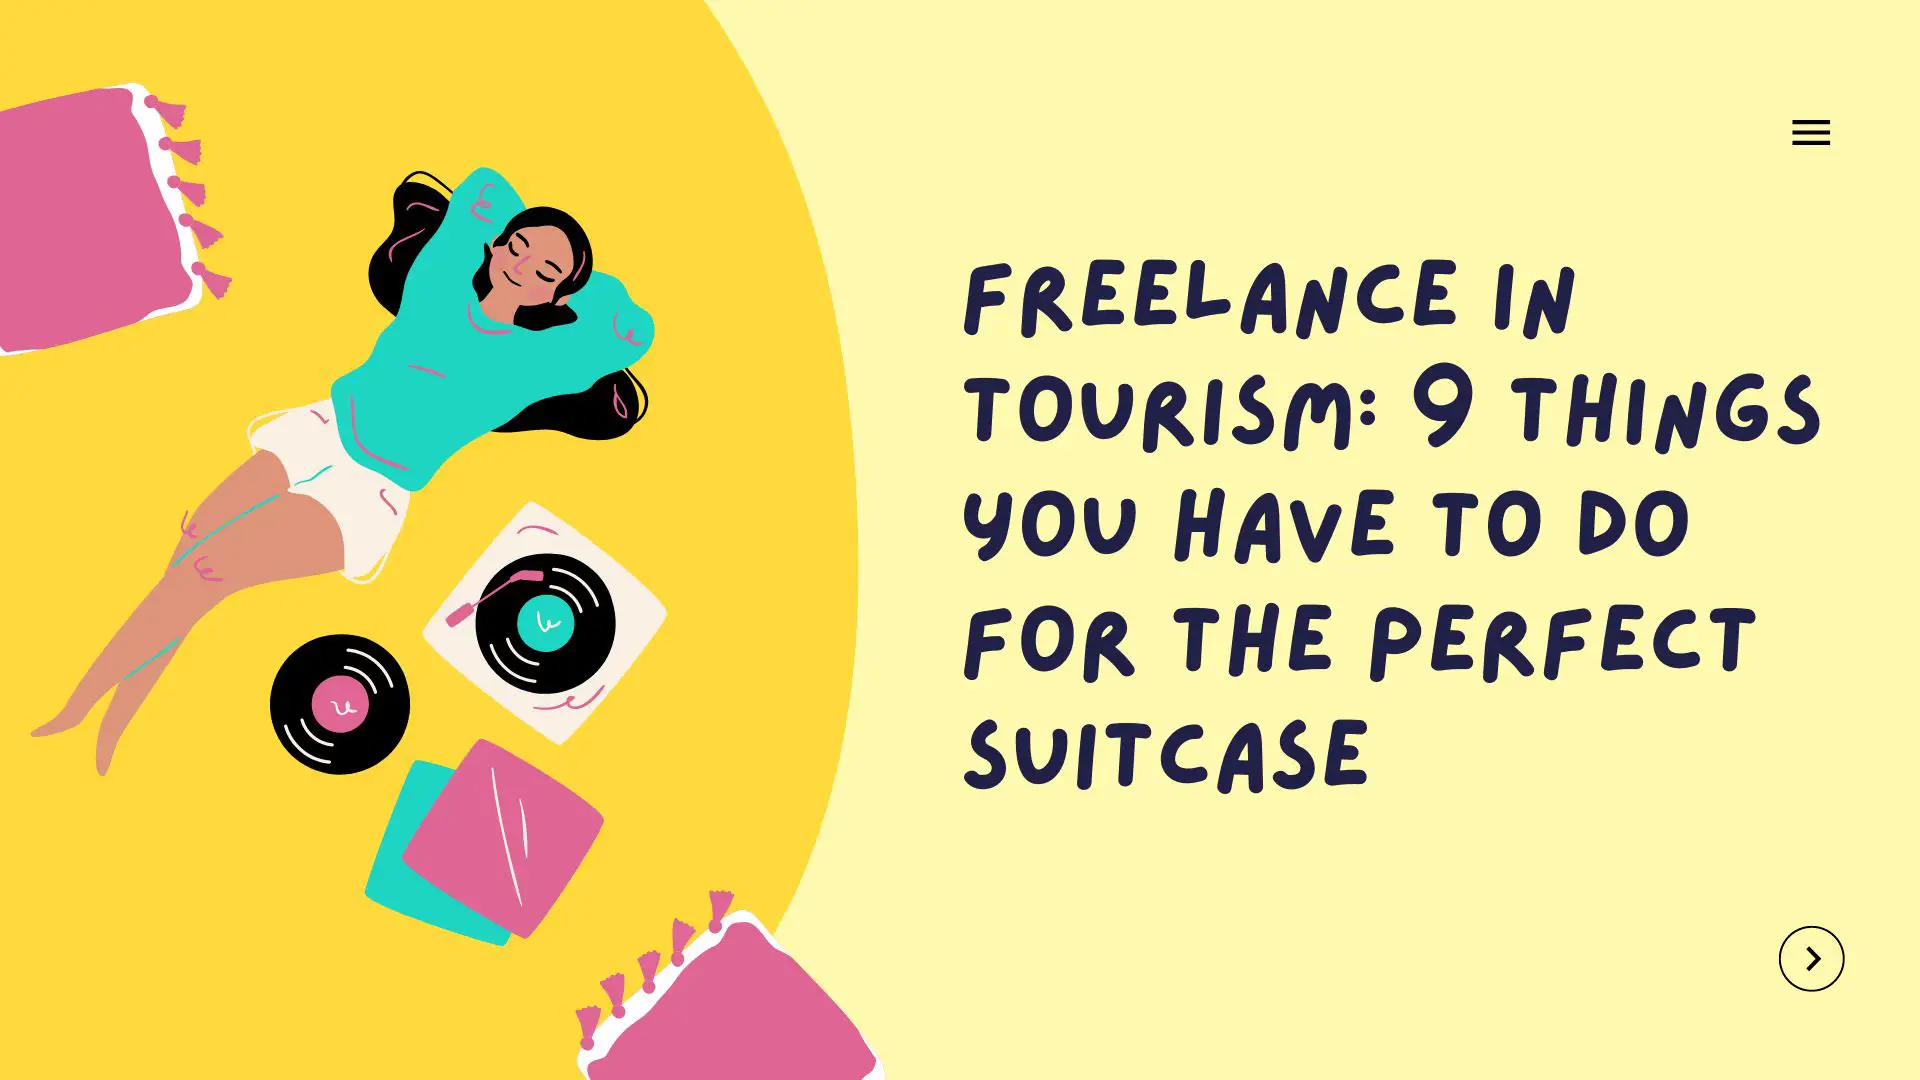 Freelance In Tourism: 9 Things You Have To Do For The Perfect Suitcase